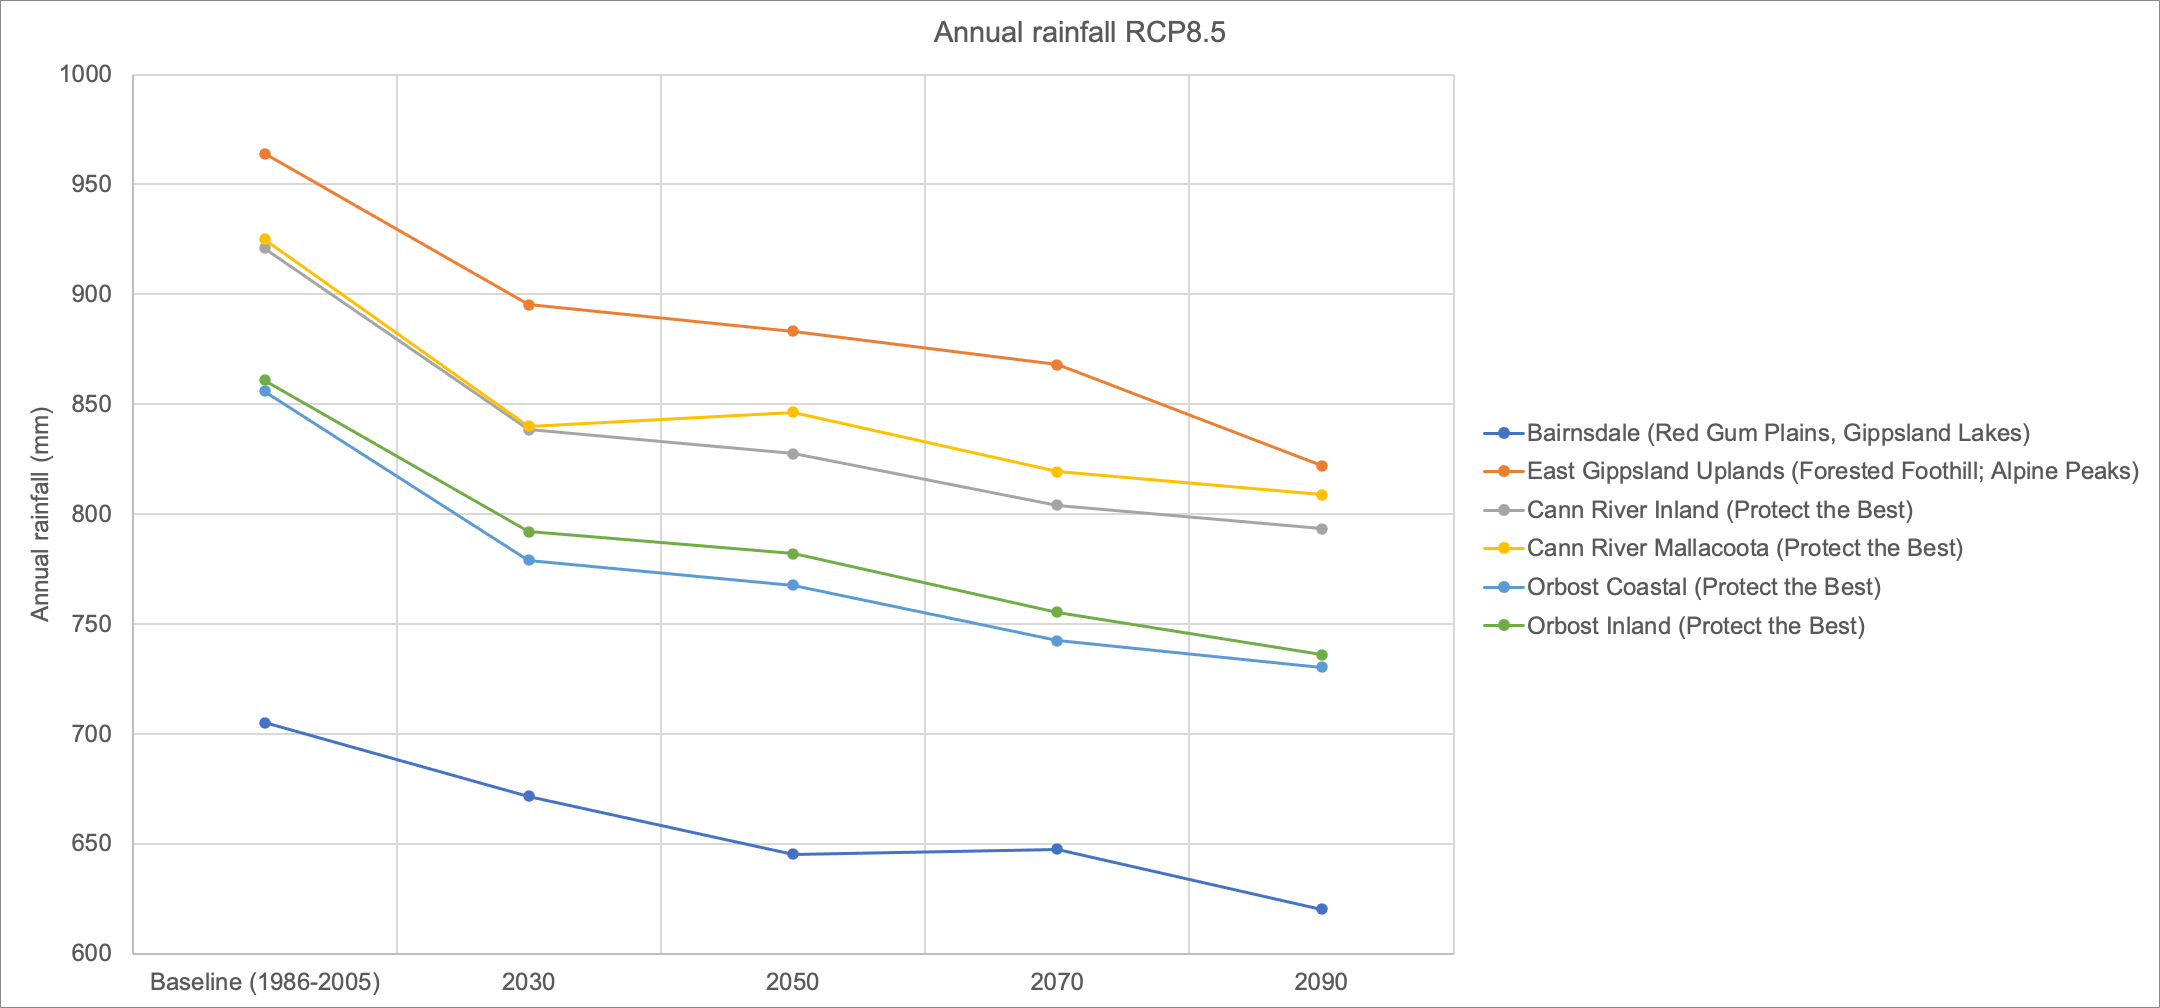 Median predicted decreases in annual rainfall for RCP8.5